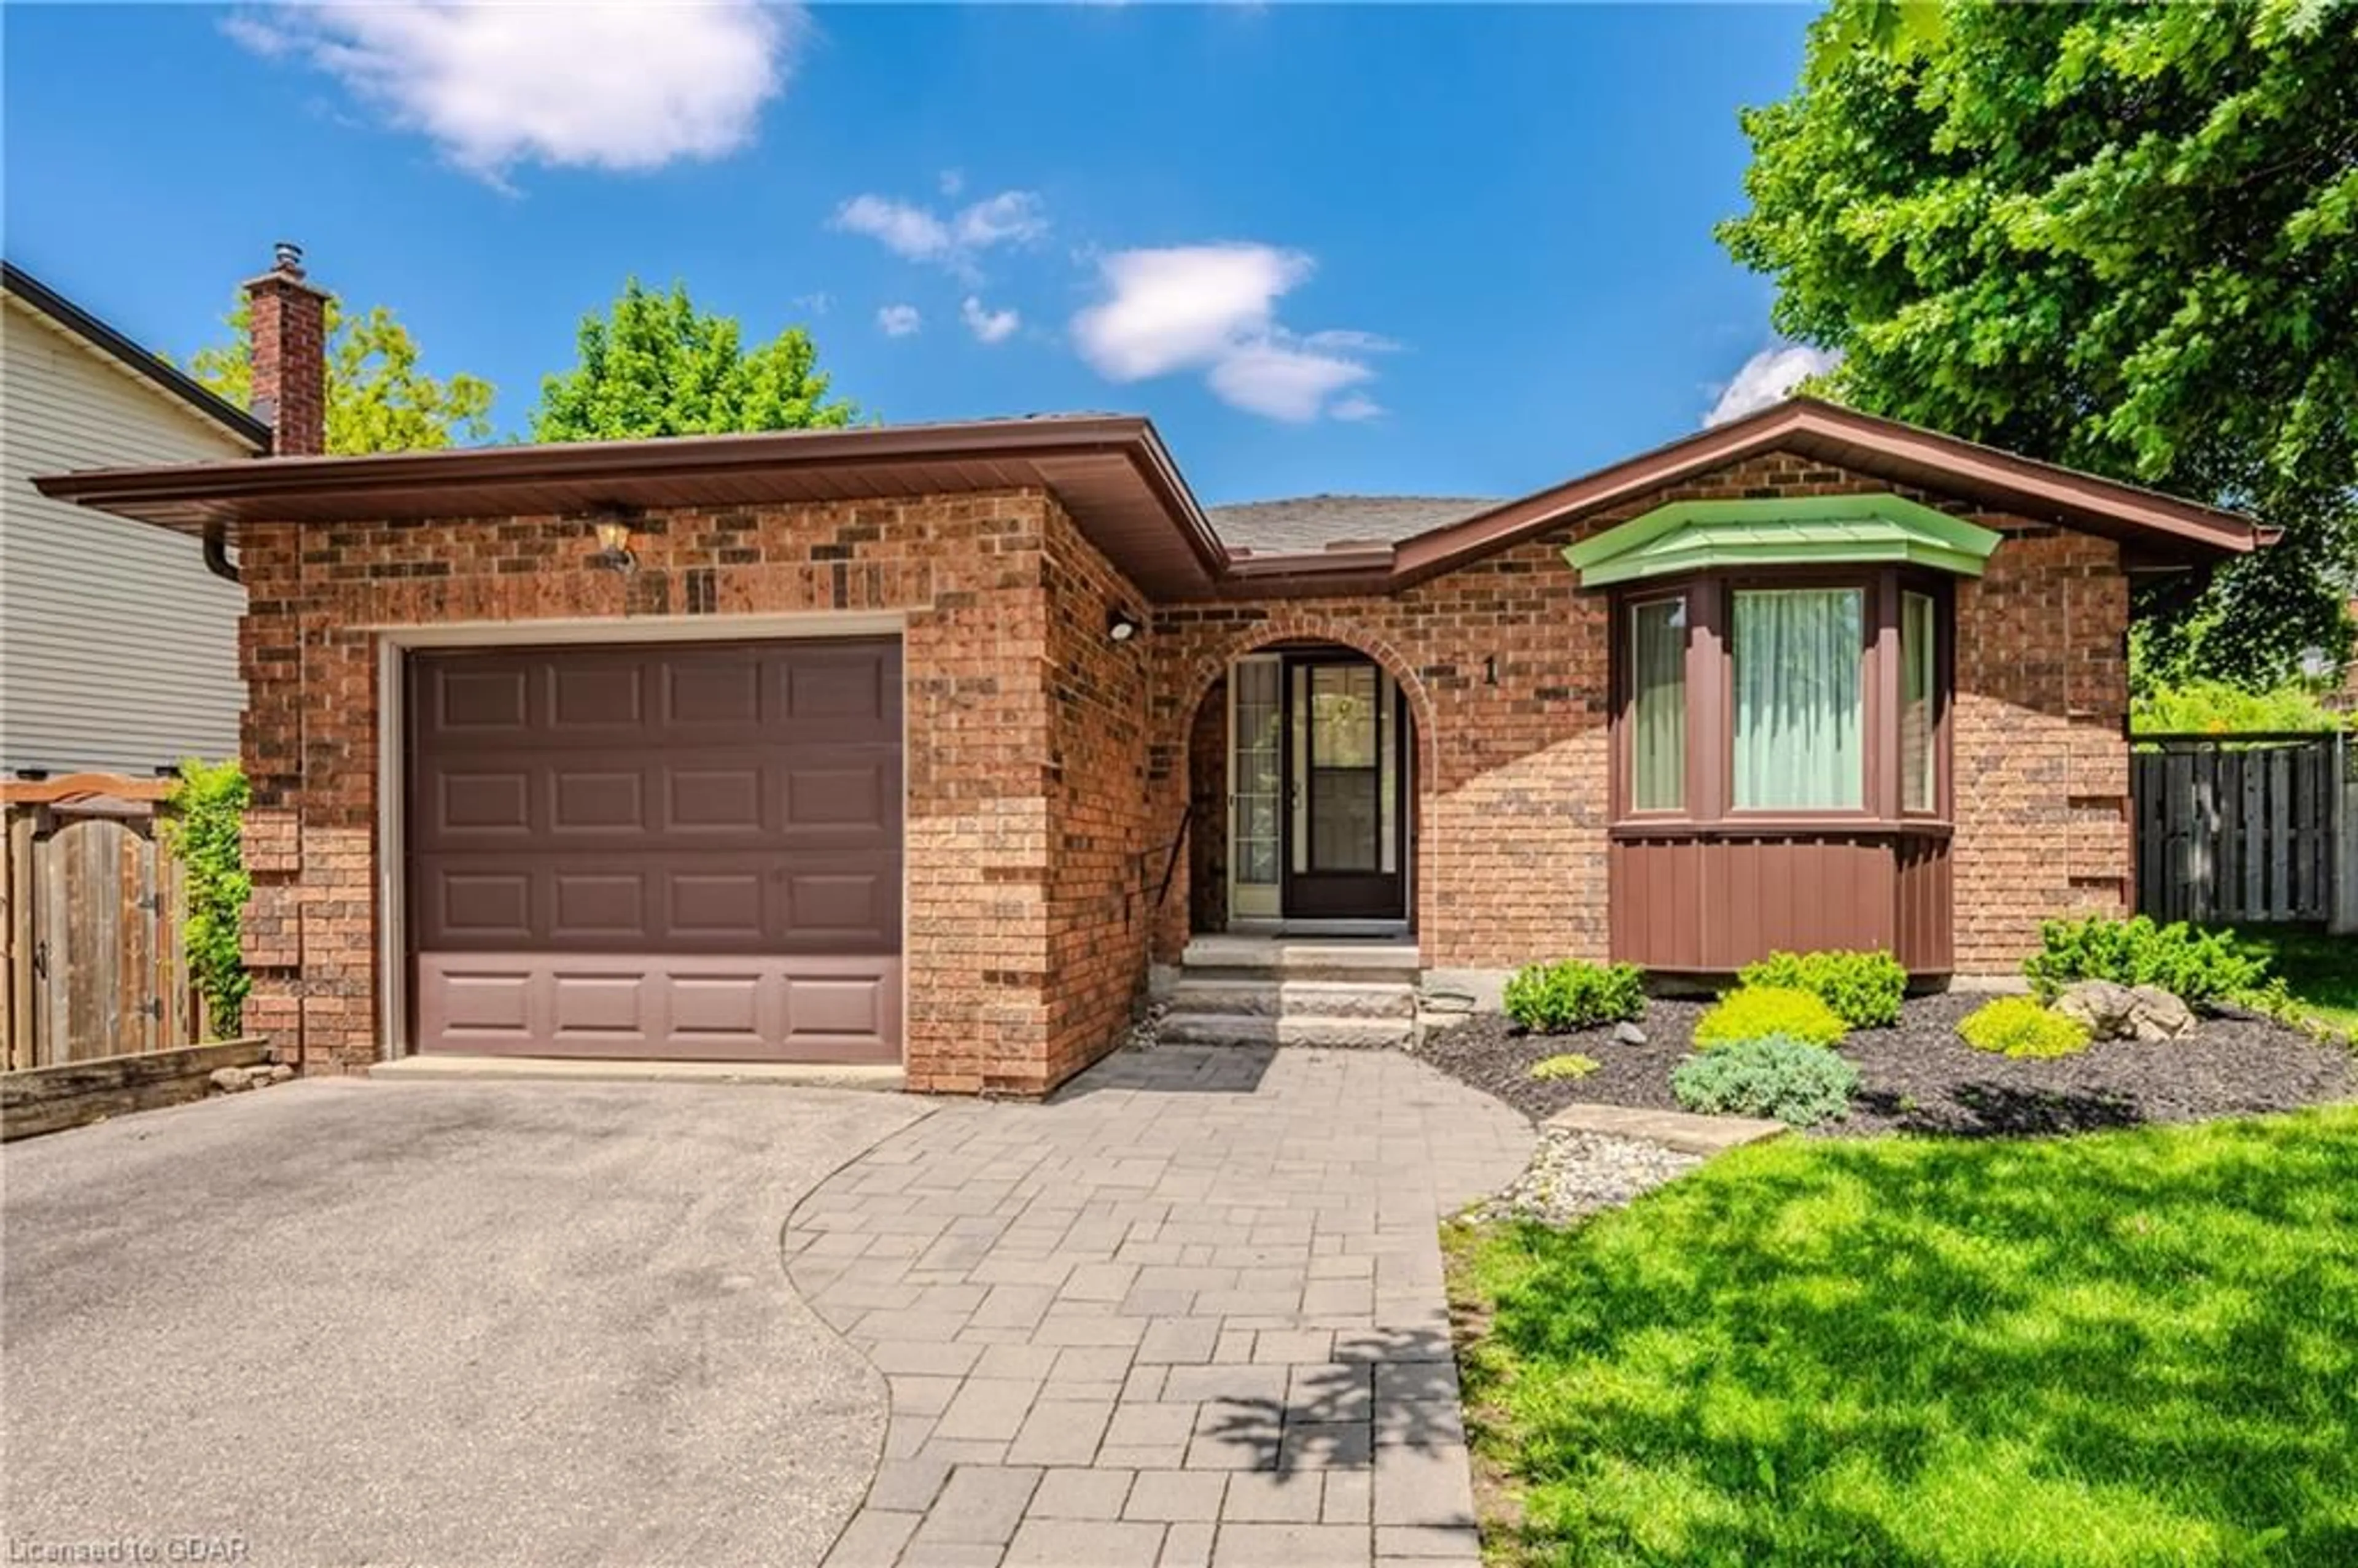 Home with brick exterior material for 1 Kipling Ave, Guelph Ontario N1H 8A2